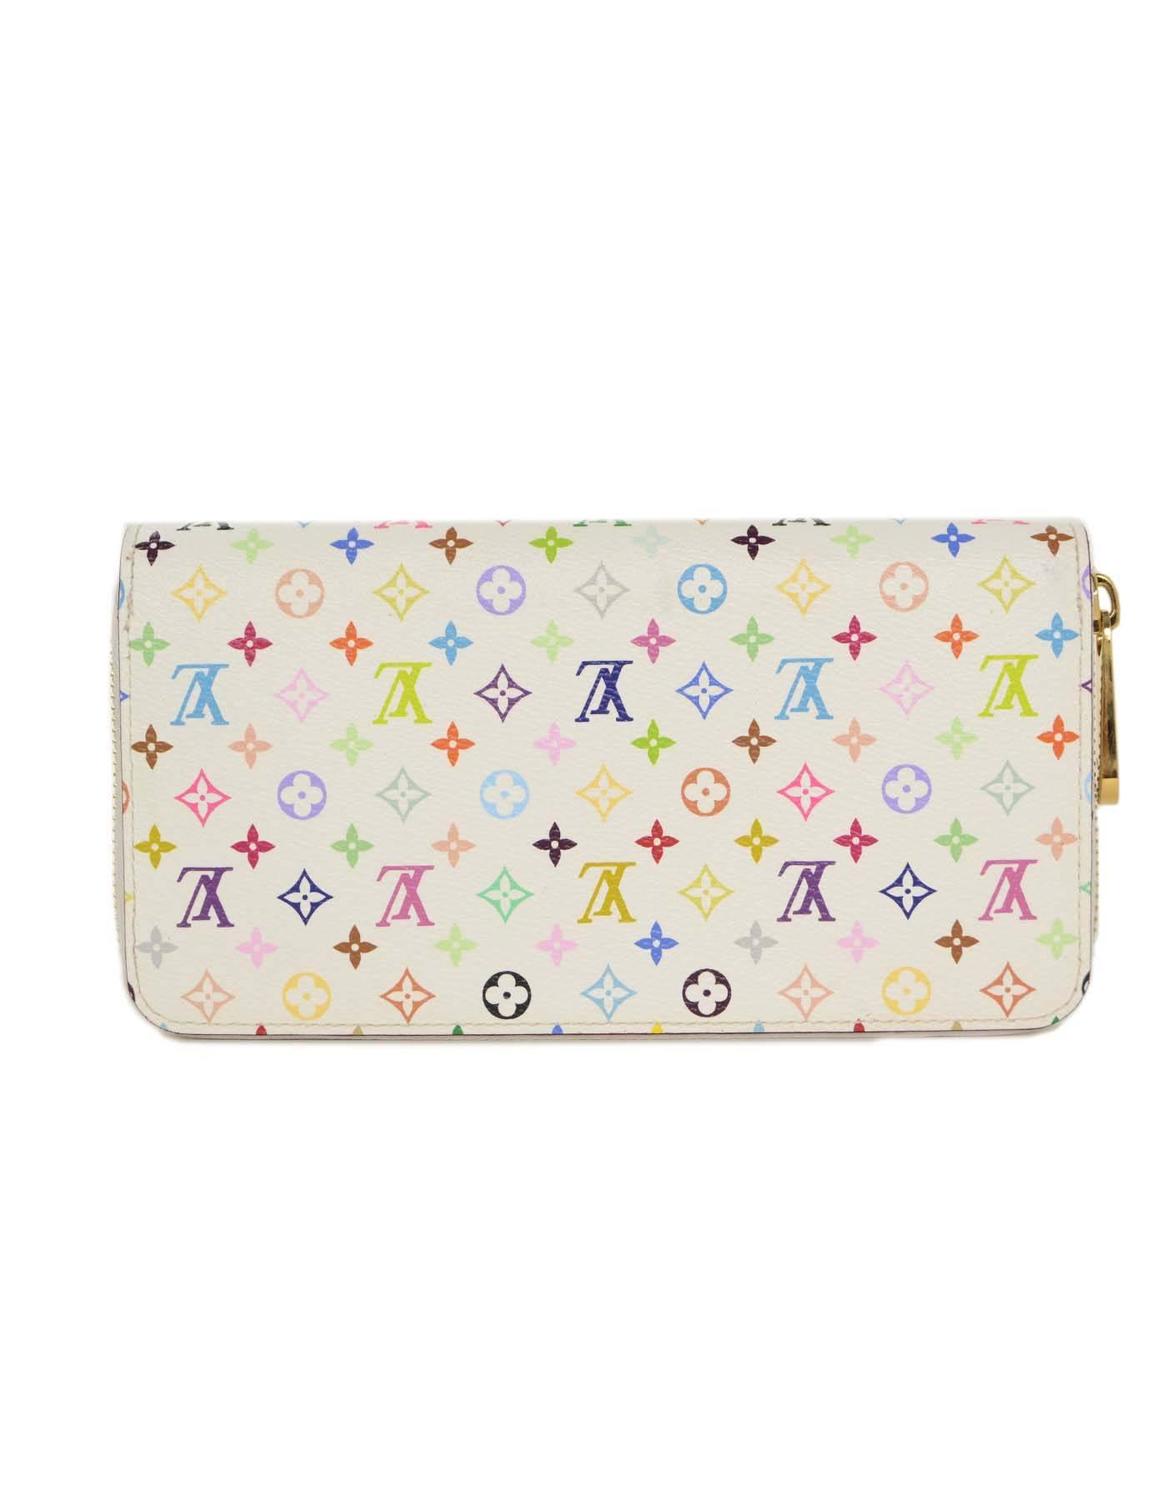 Louis Vuitton White and Multi-Color Monogram Zippy Wallet GHW For Sale at 1stdibs